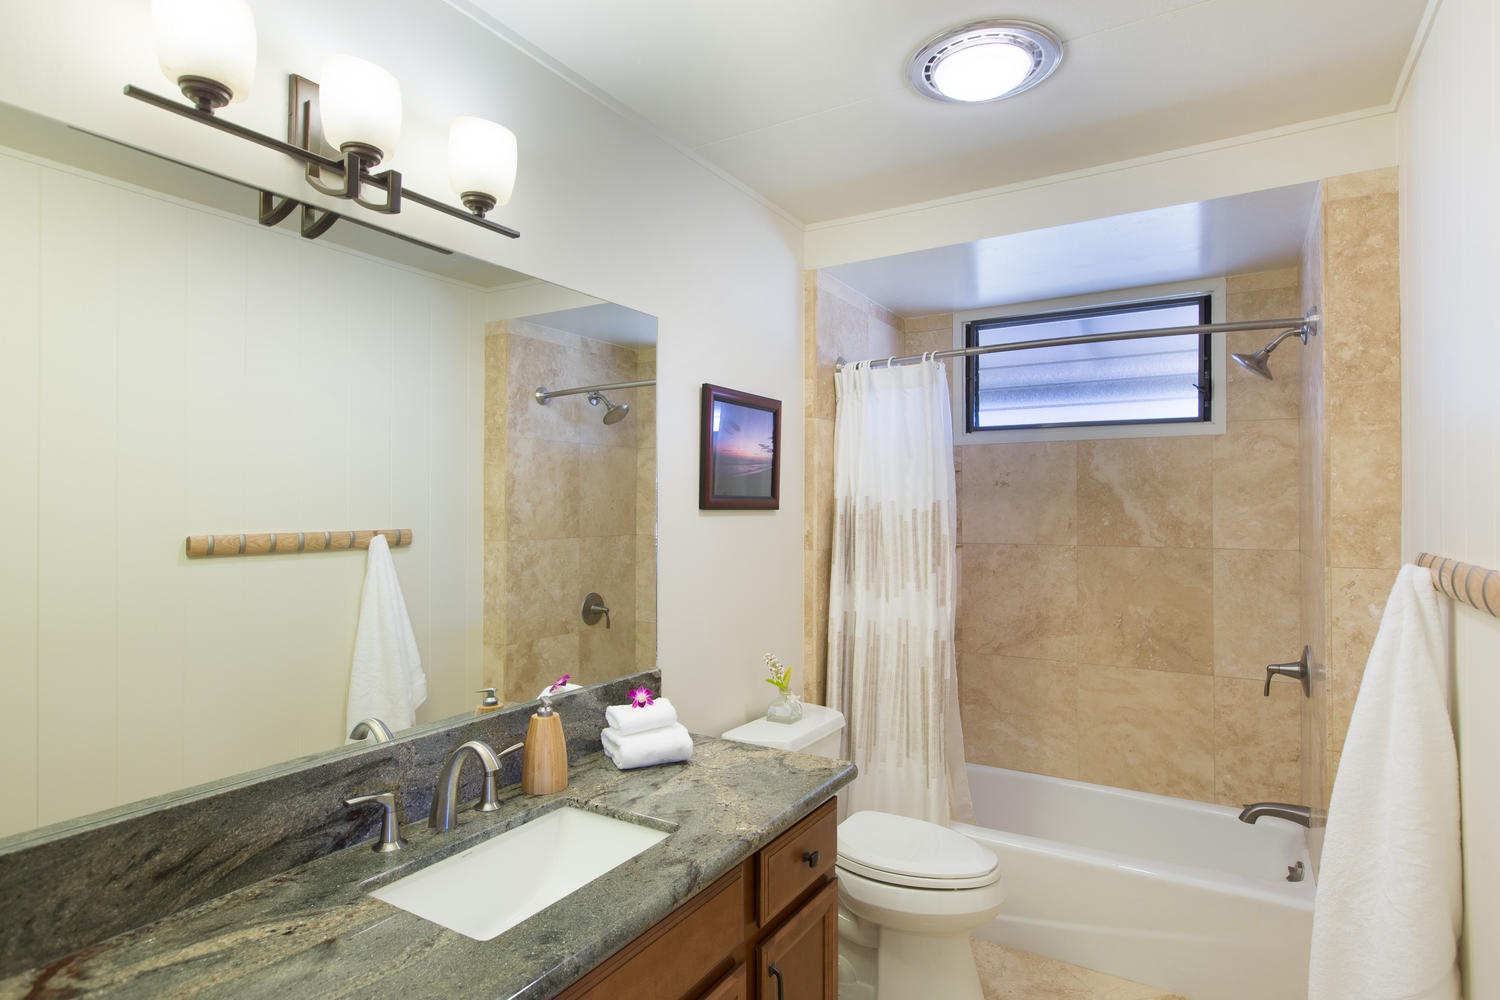 Honolulu Vacation Rentals, Hale Poola - Beautifully remodeled shared bath for bedrooms two and three.